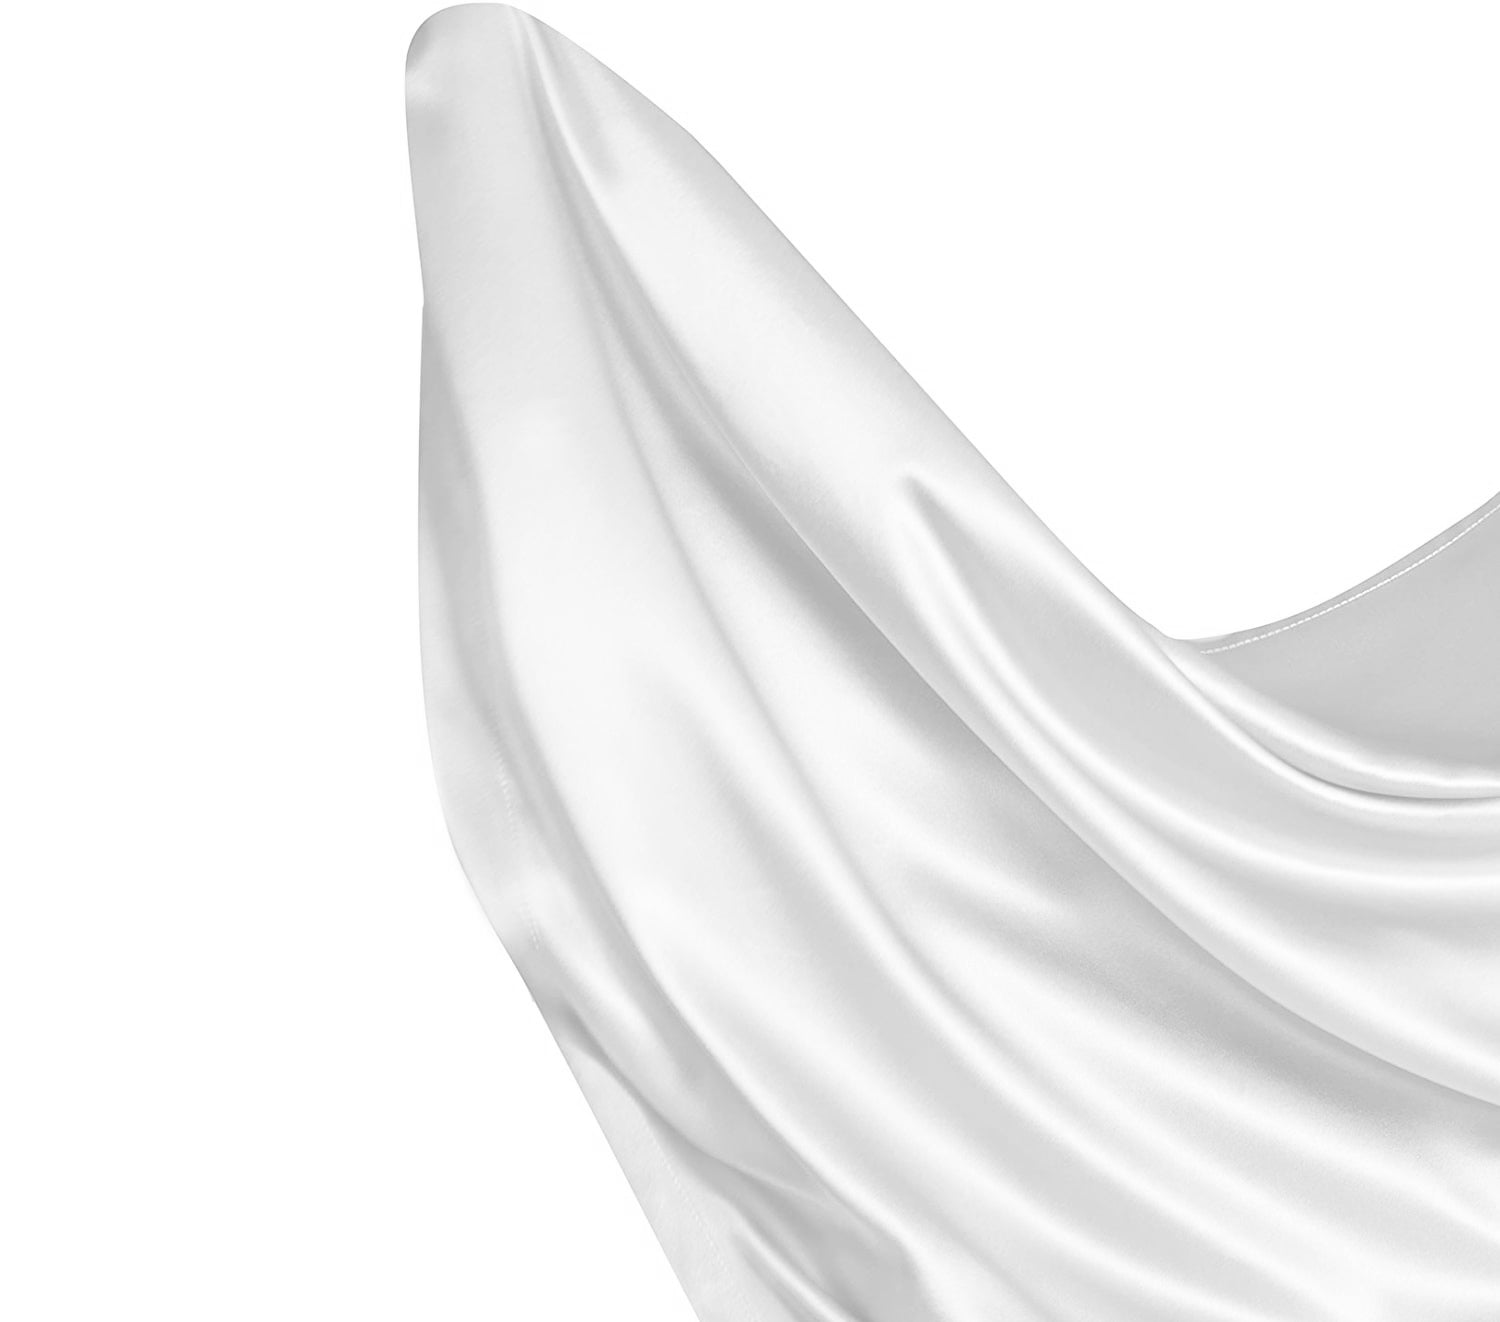 Satin fitted sheet in white floating in the air